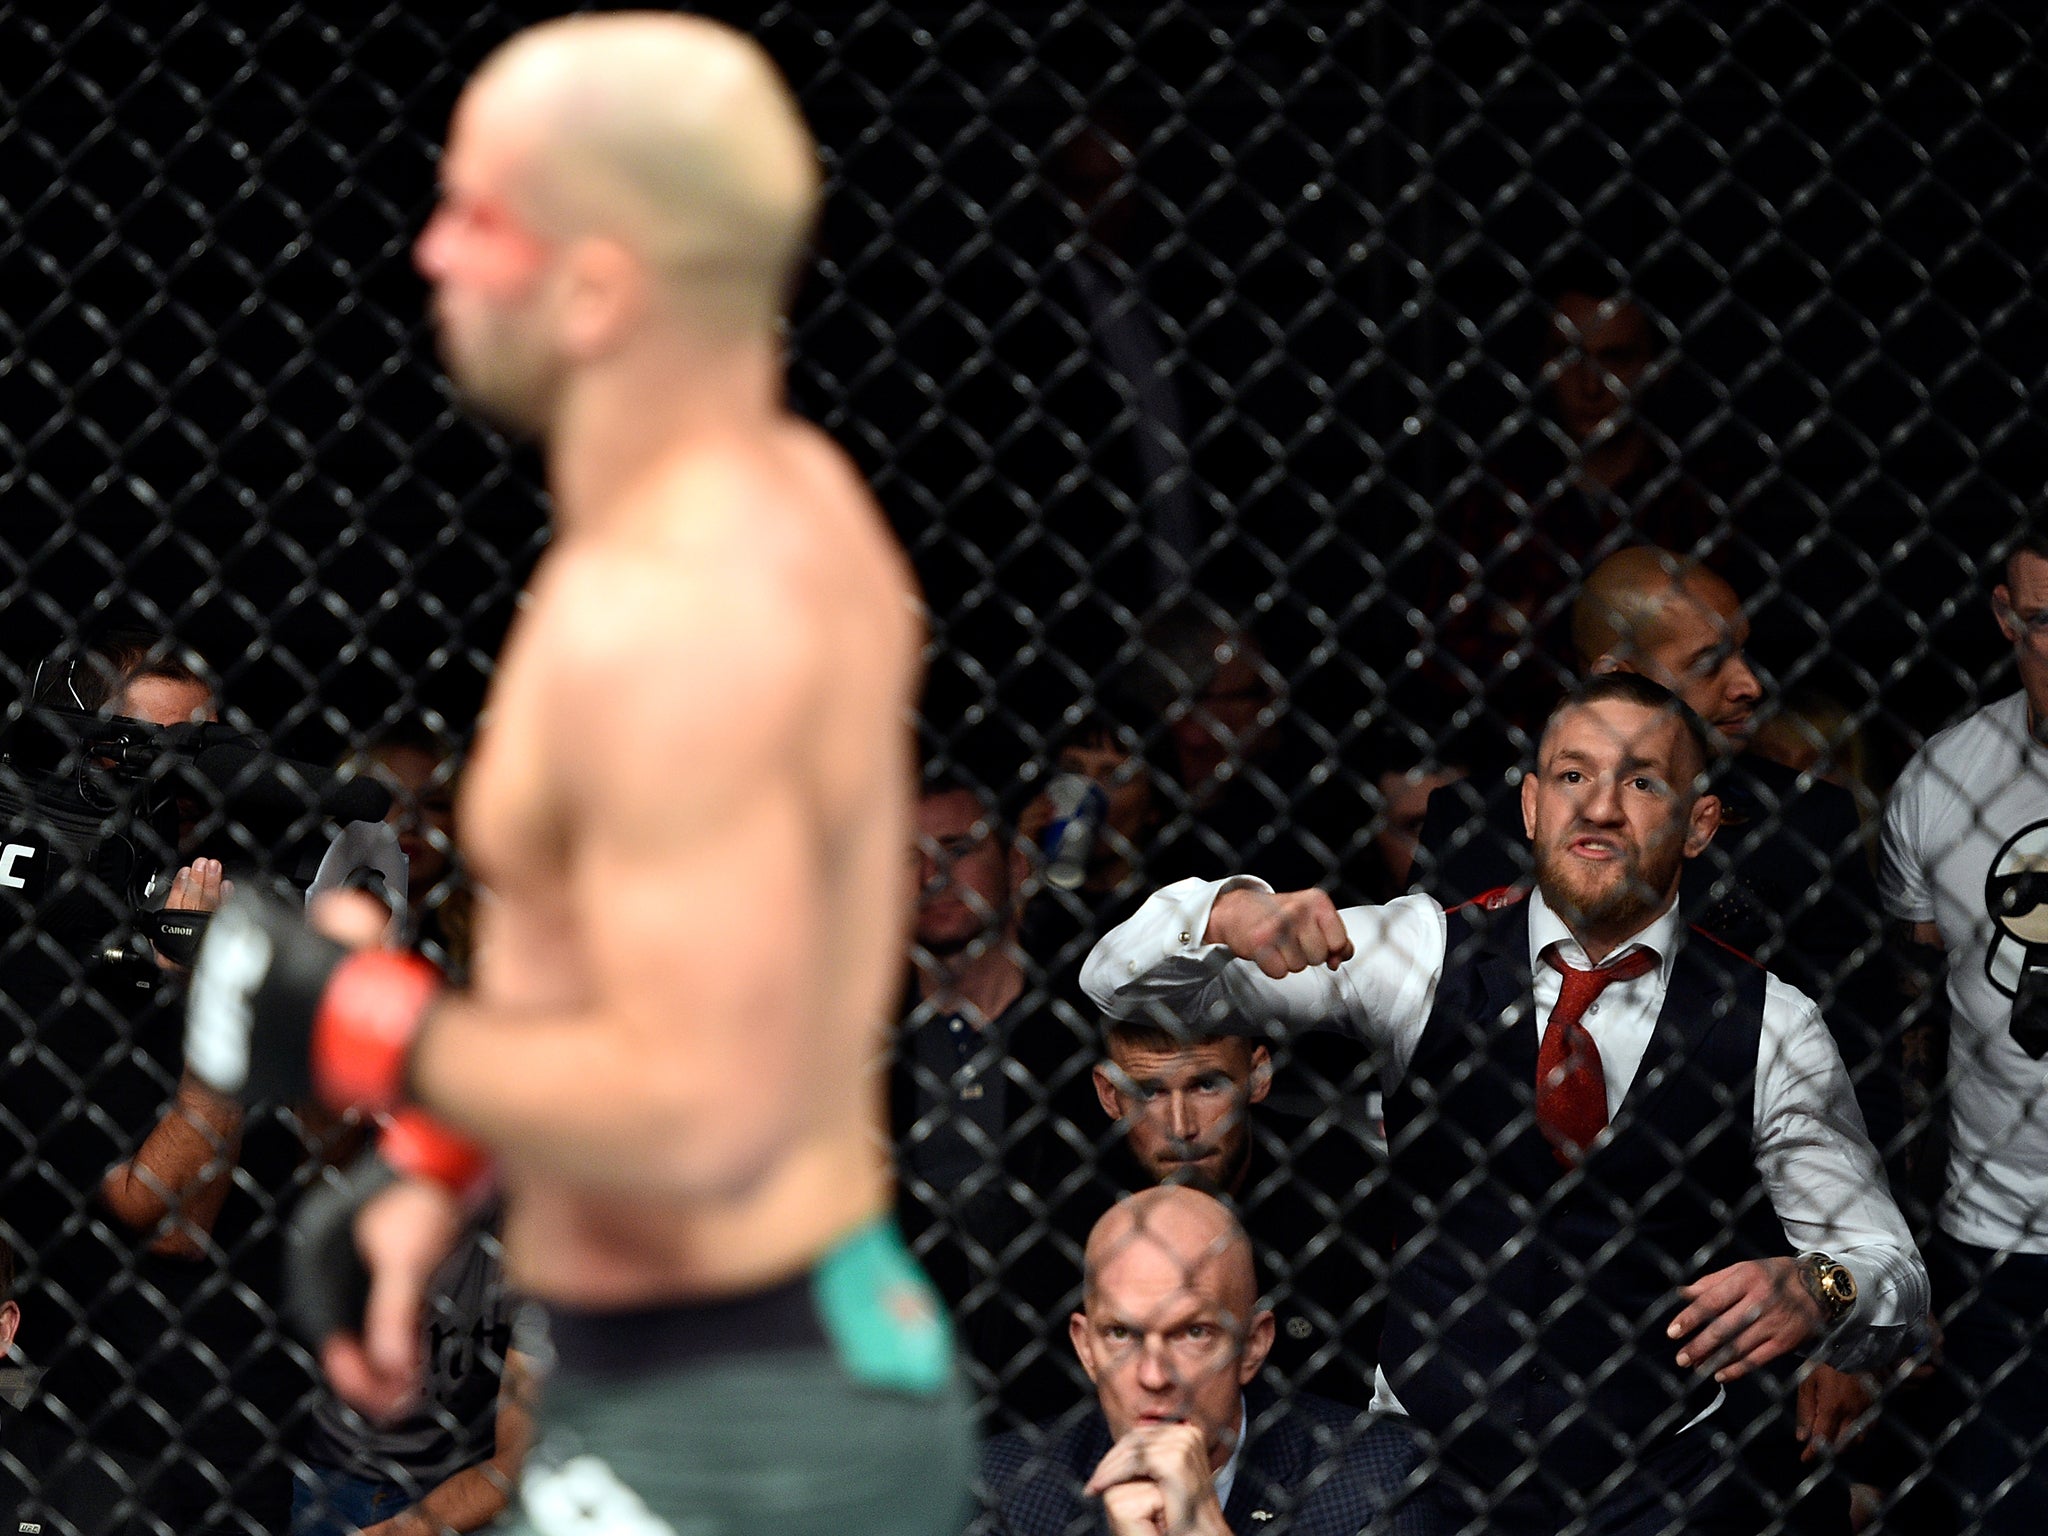 Conor McGregor was warned for coaching teammate Artem Lobov during his defeat by Andre Fili